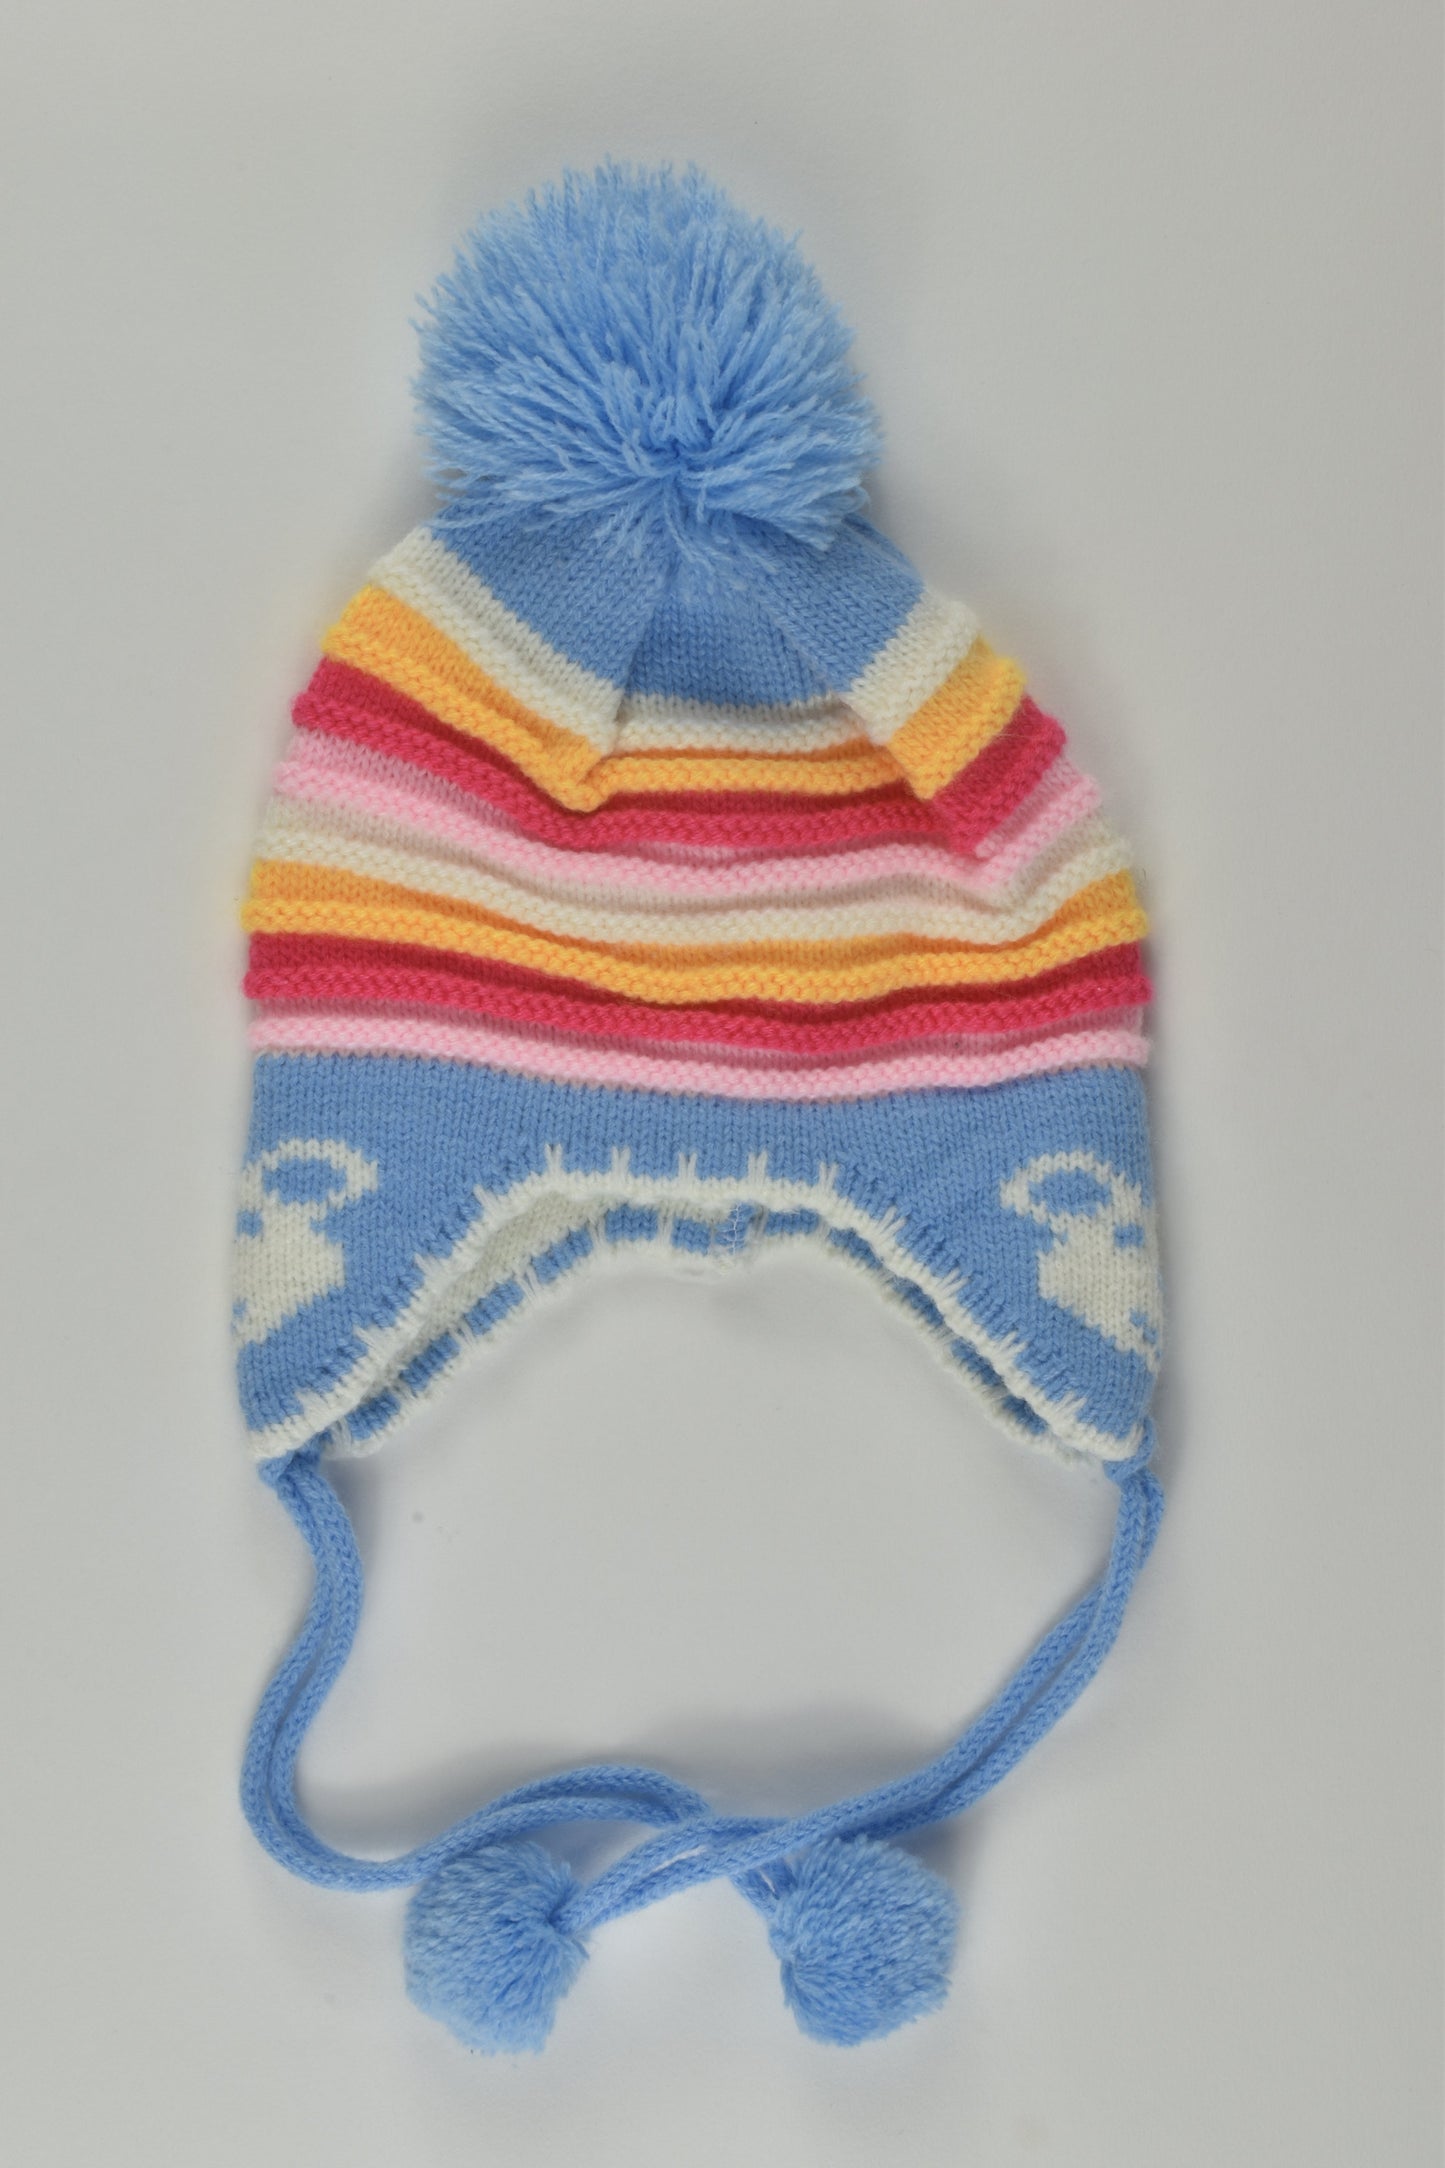 Brand Unknown Size approx 6-12 months Knit Beanie